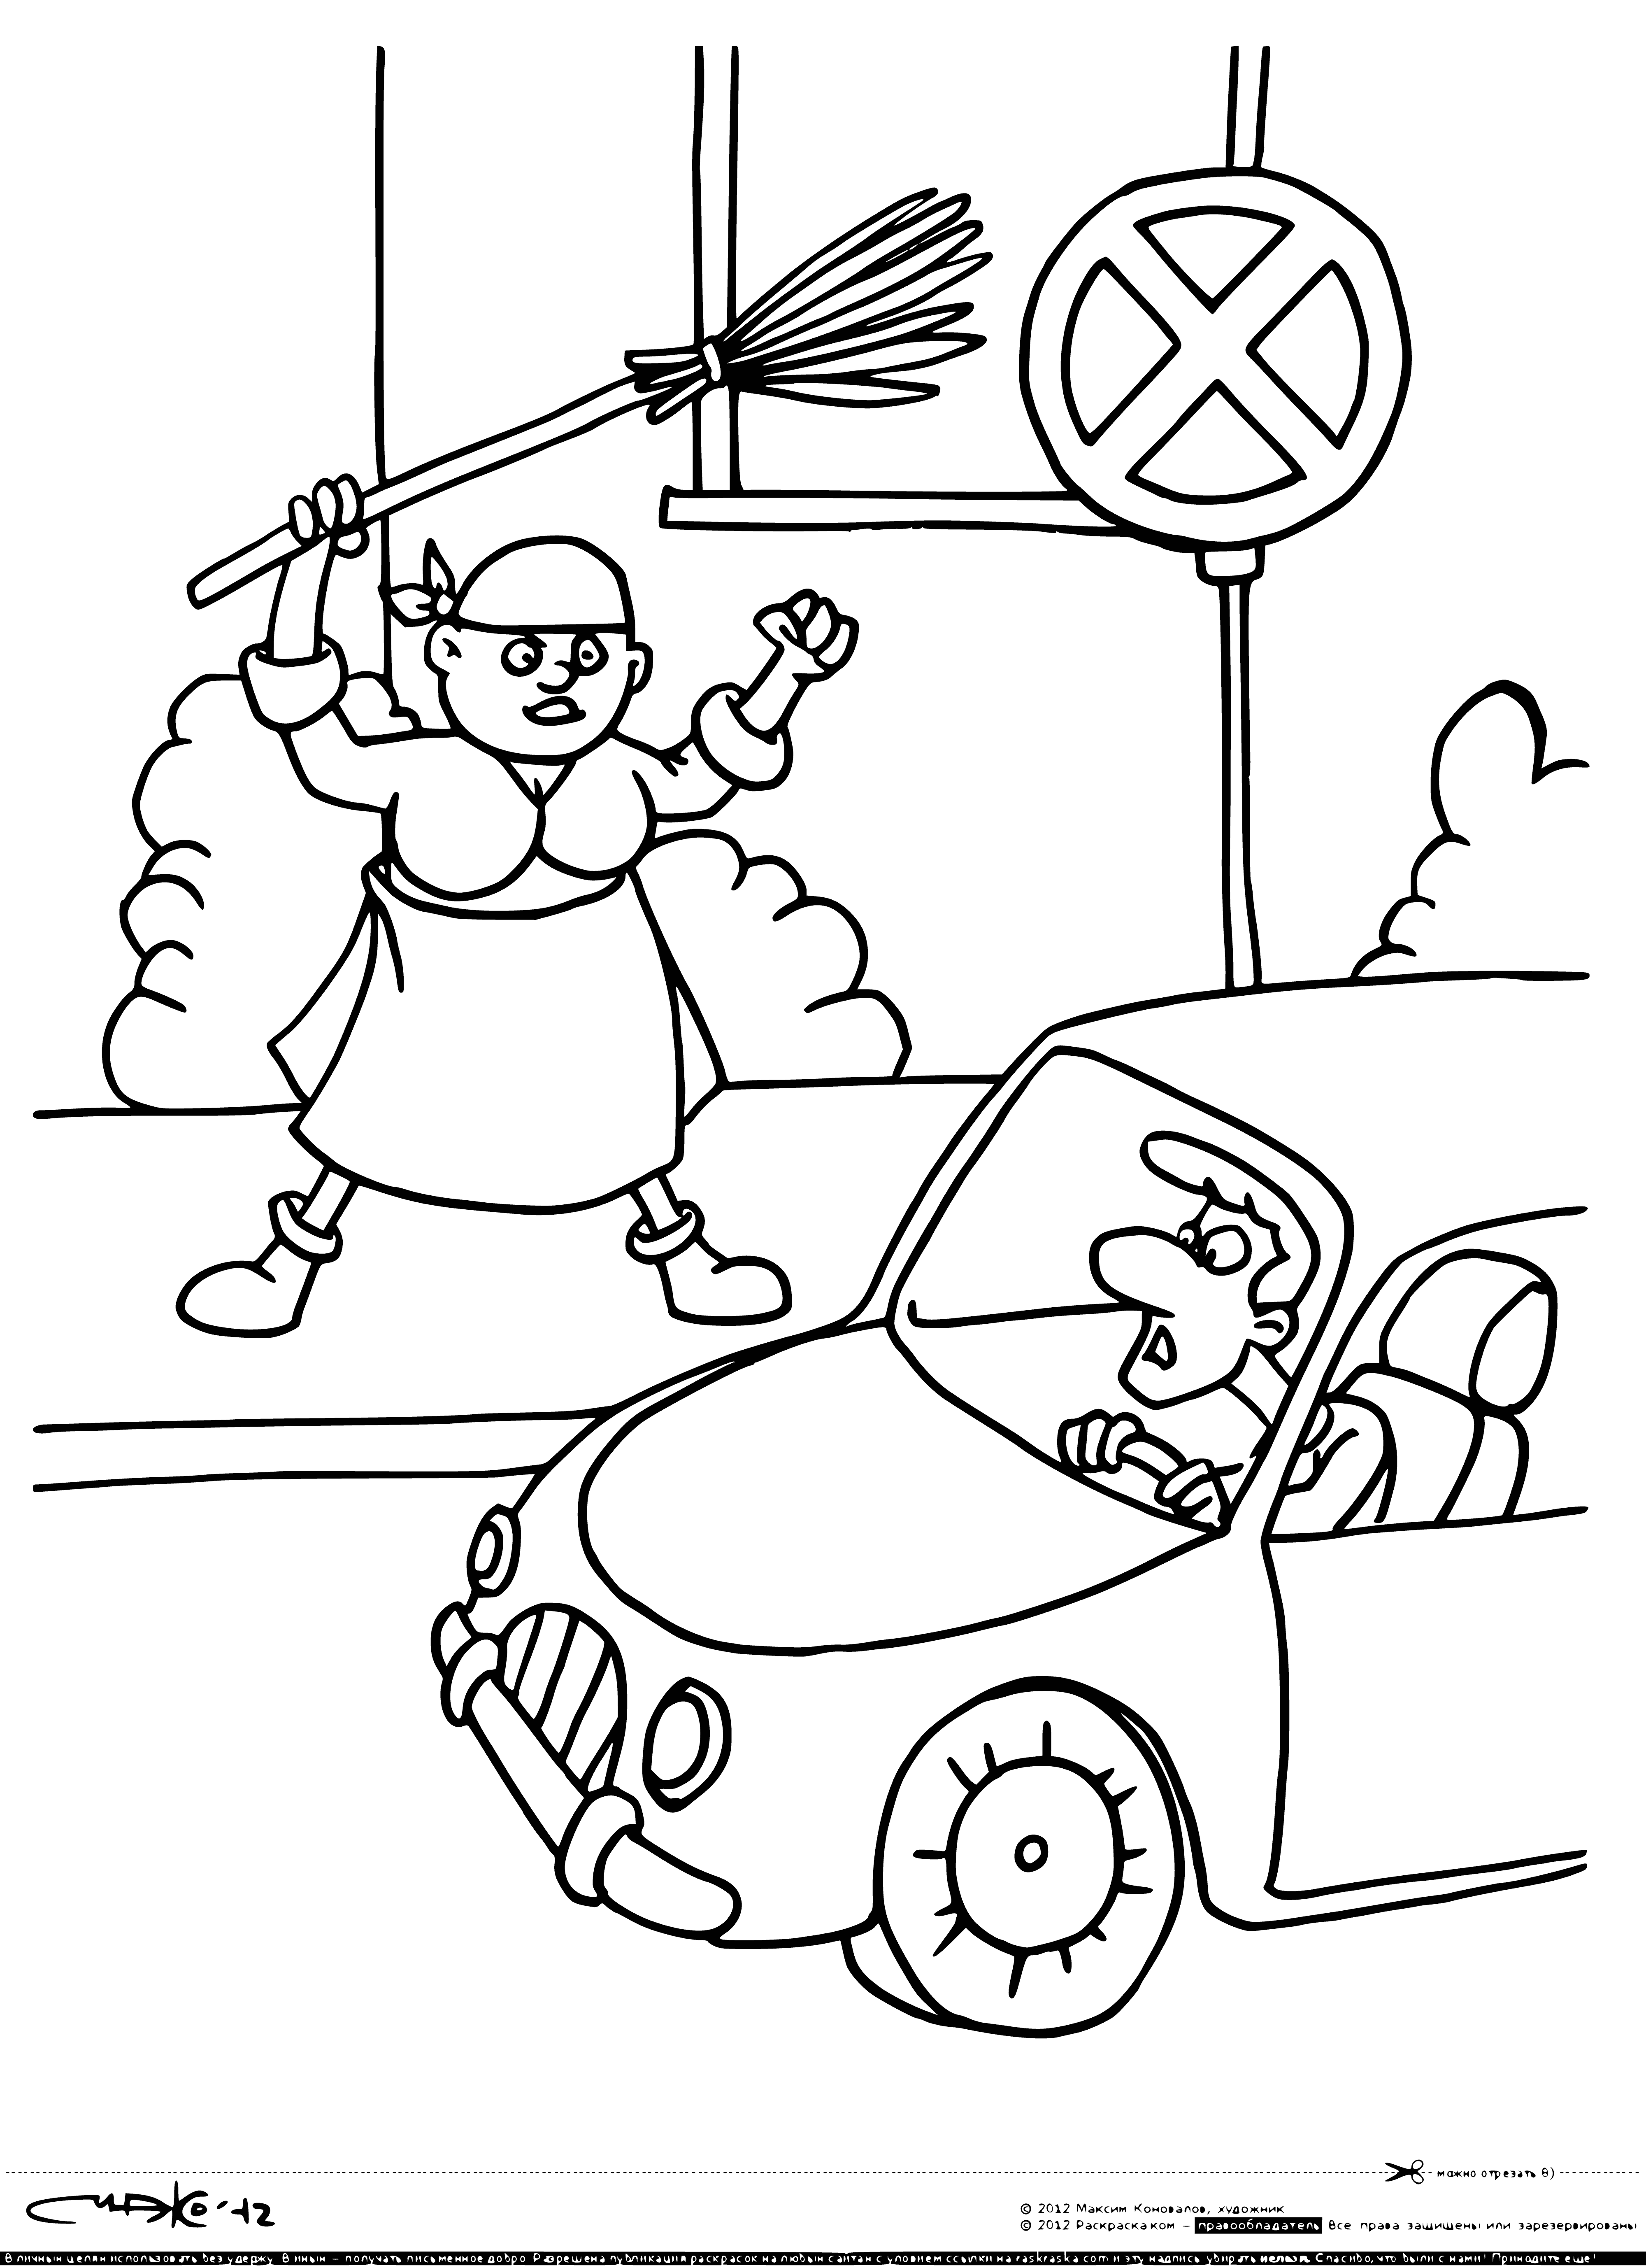 Stopping prohibited coloring page